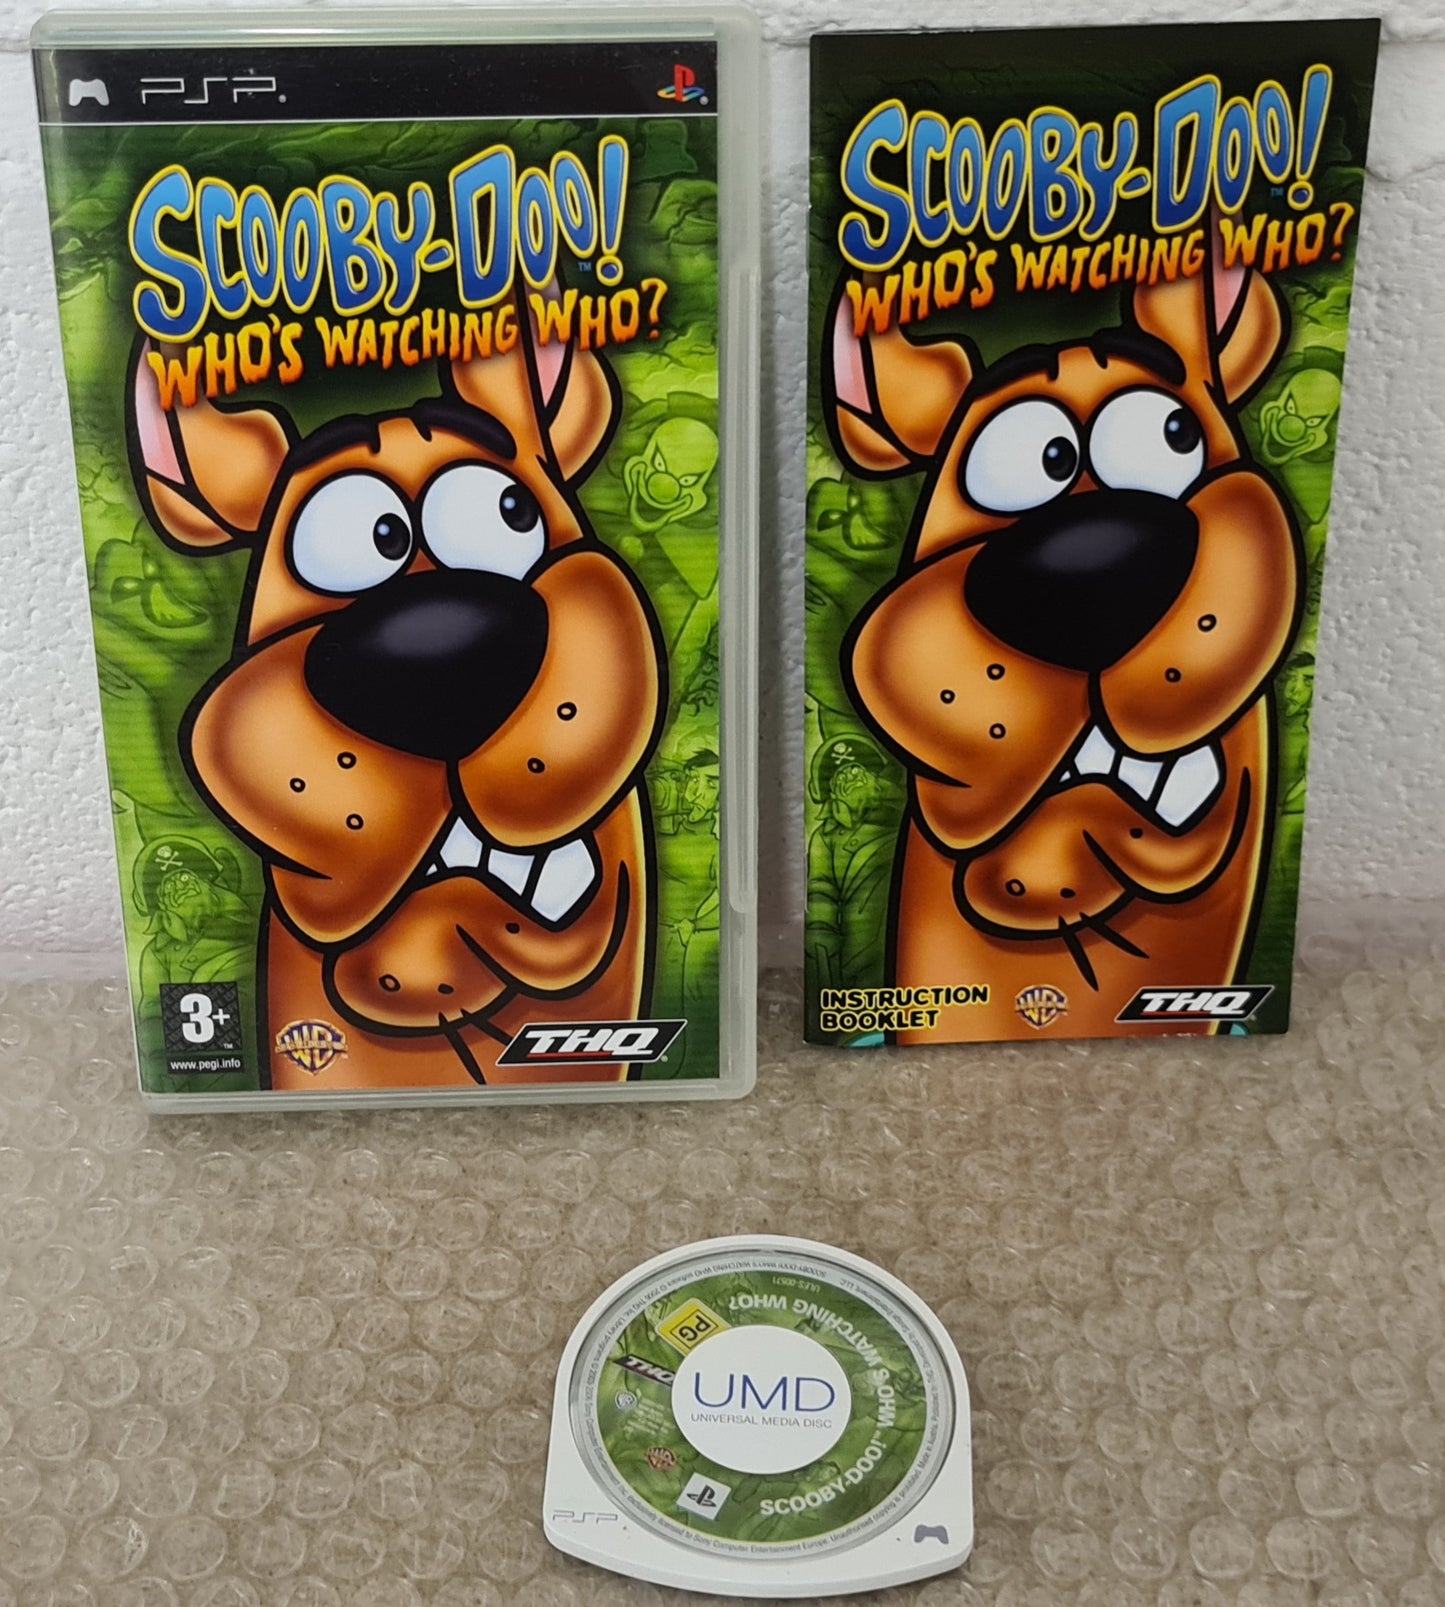 Scooby-Doo Who's Watching Who? Sony PSP Game